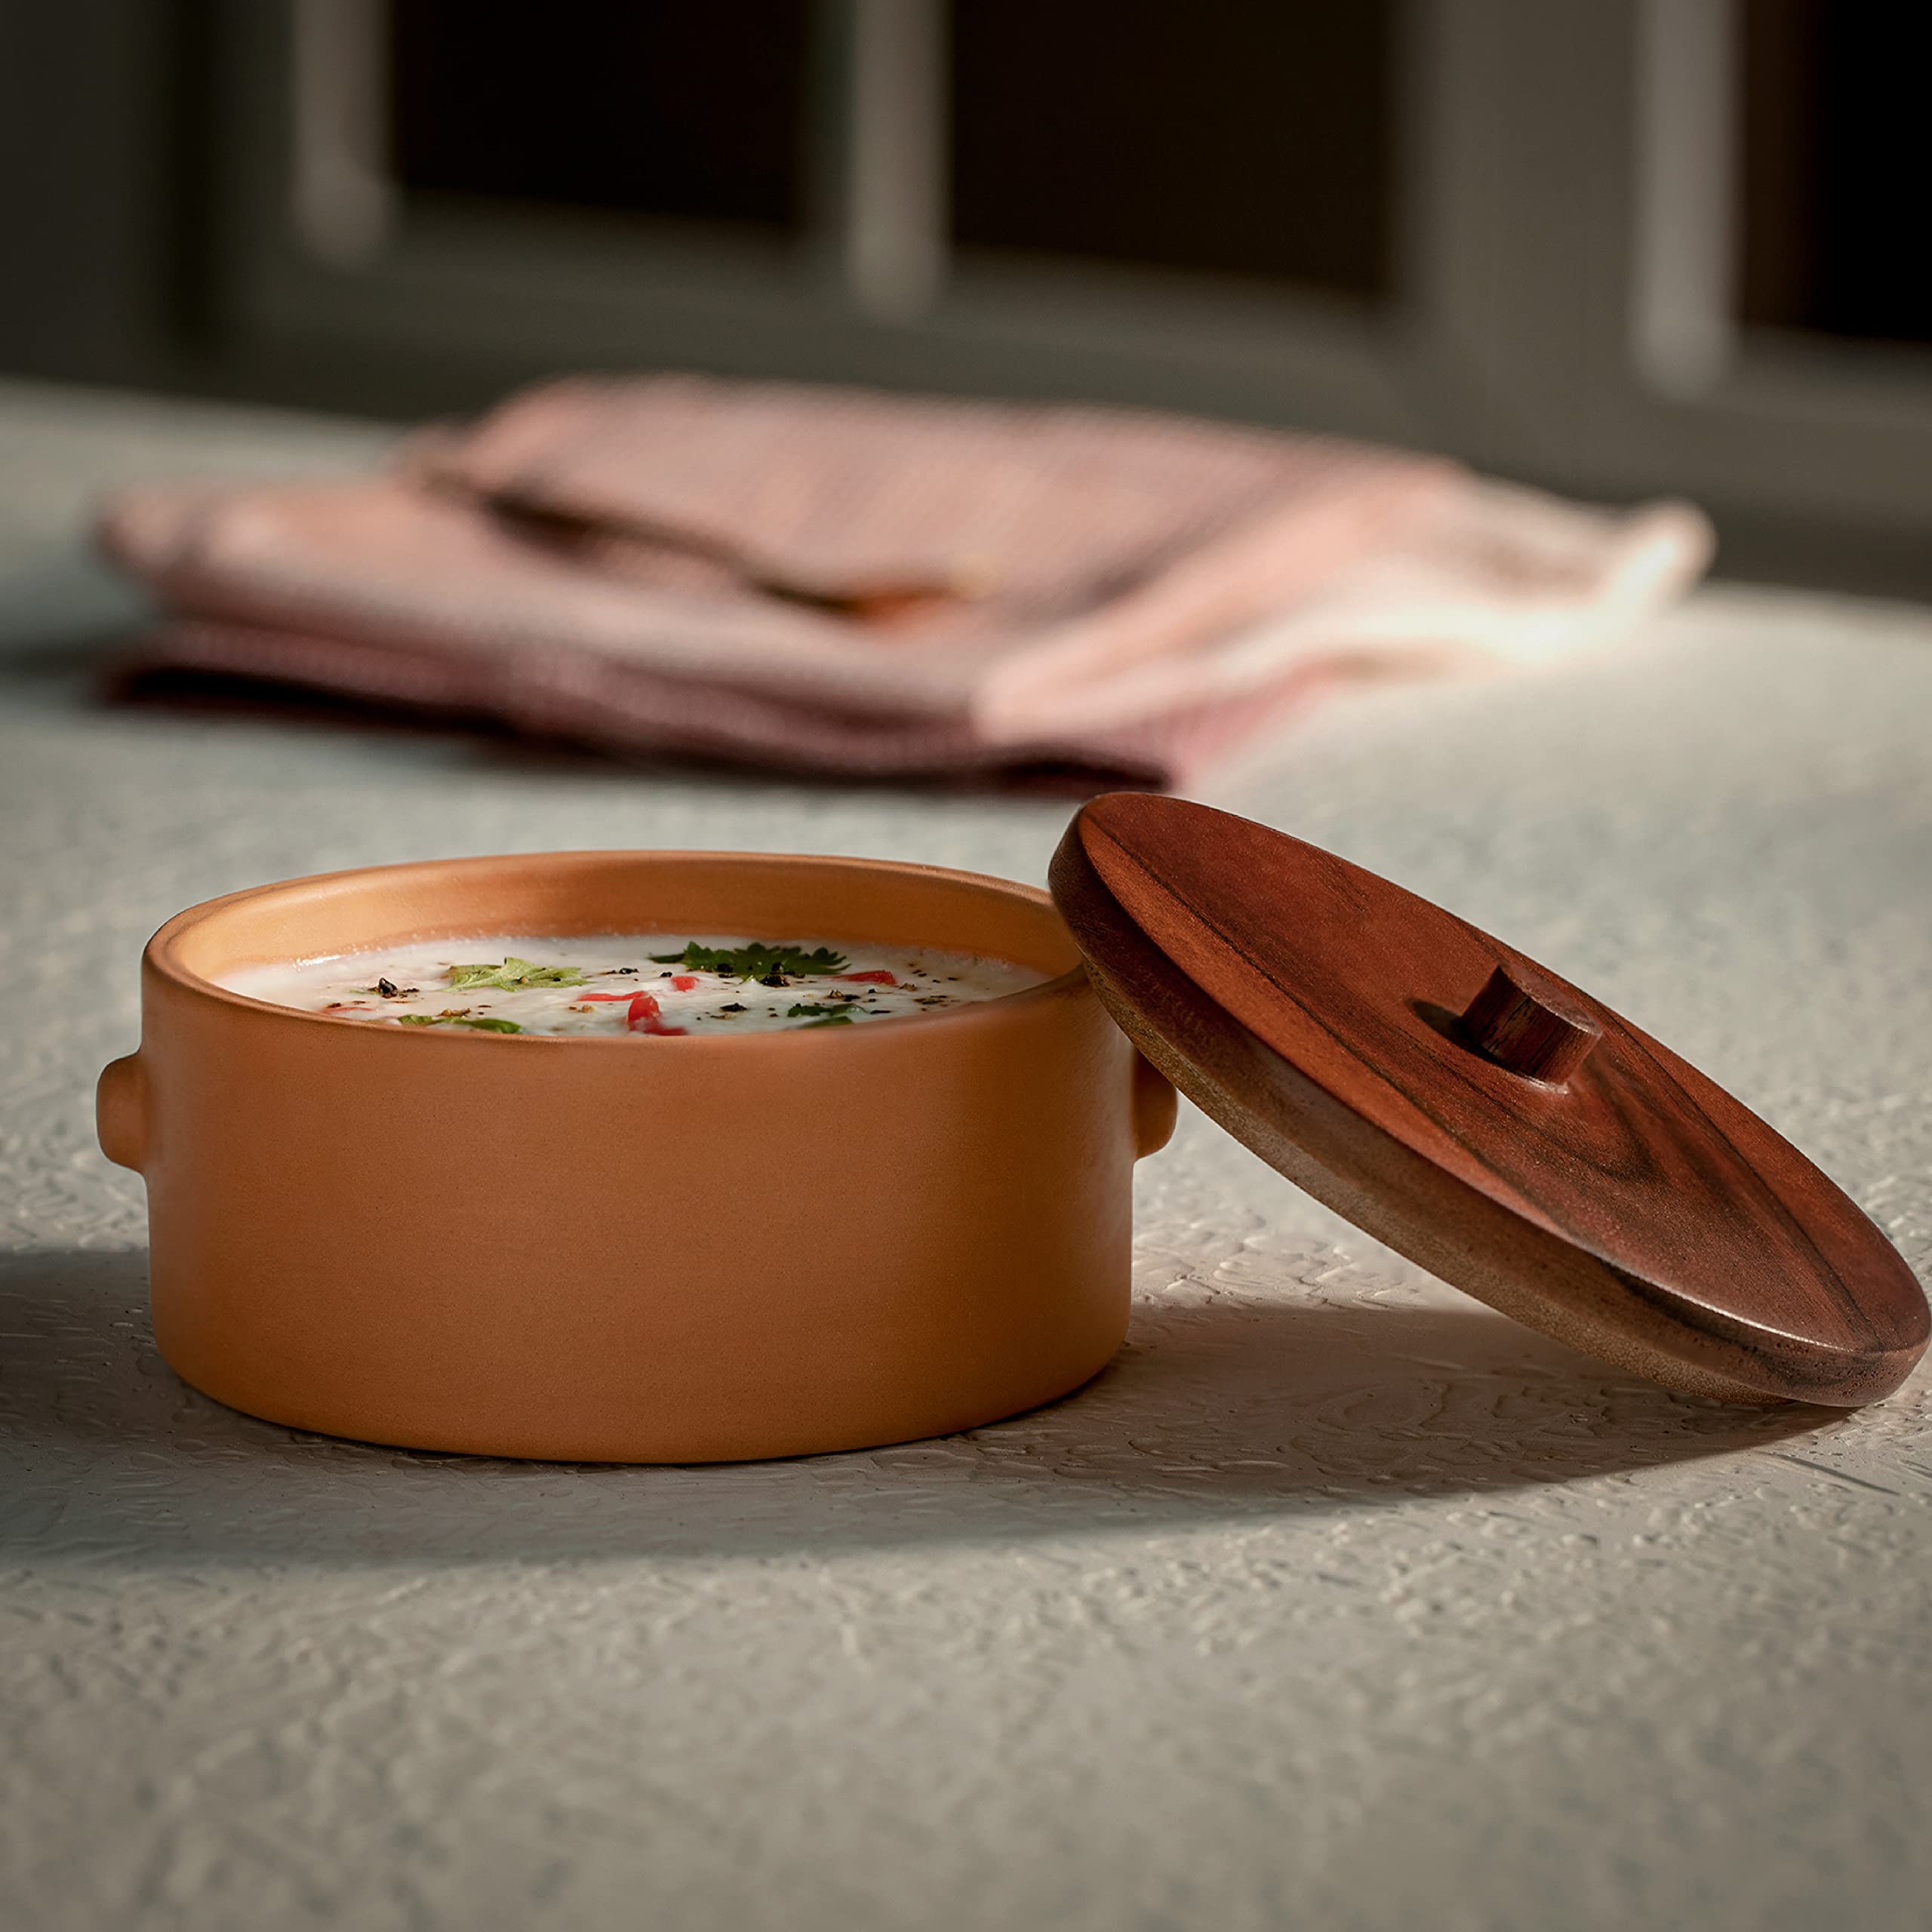 Ellementry Terracotta Curd Setter - Large| | with lid | Colour: Terracotta Red | Terracotta | Serving Bowl | 400 ML| Handcrafted | Sustainable | Food Safe | Gifting |